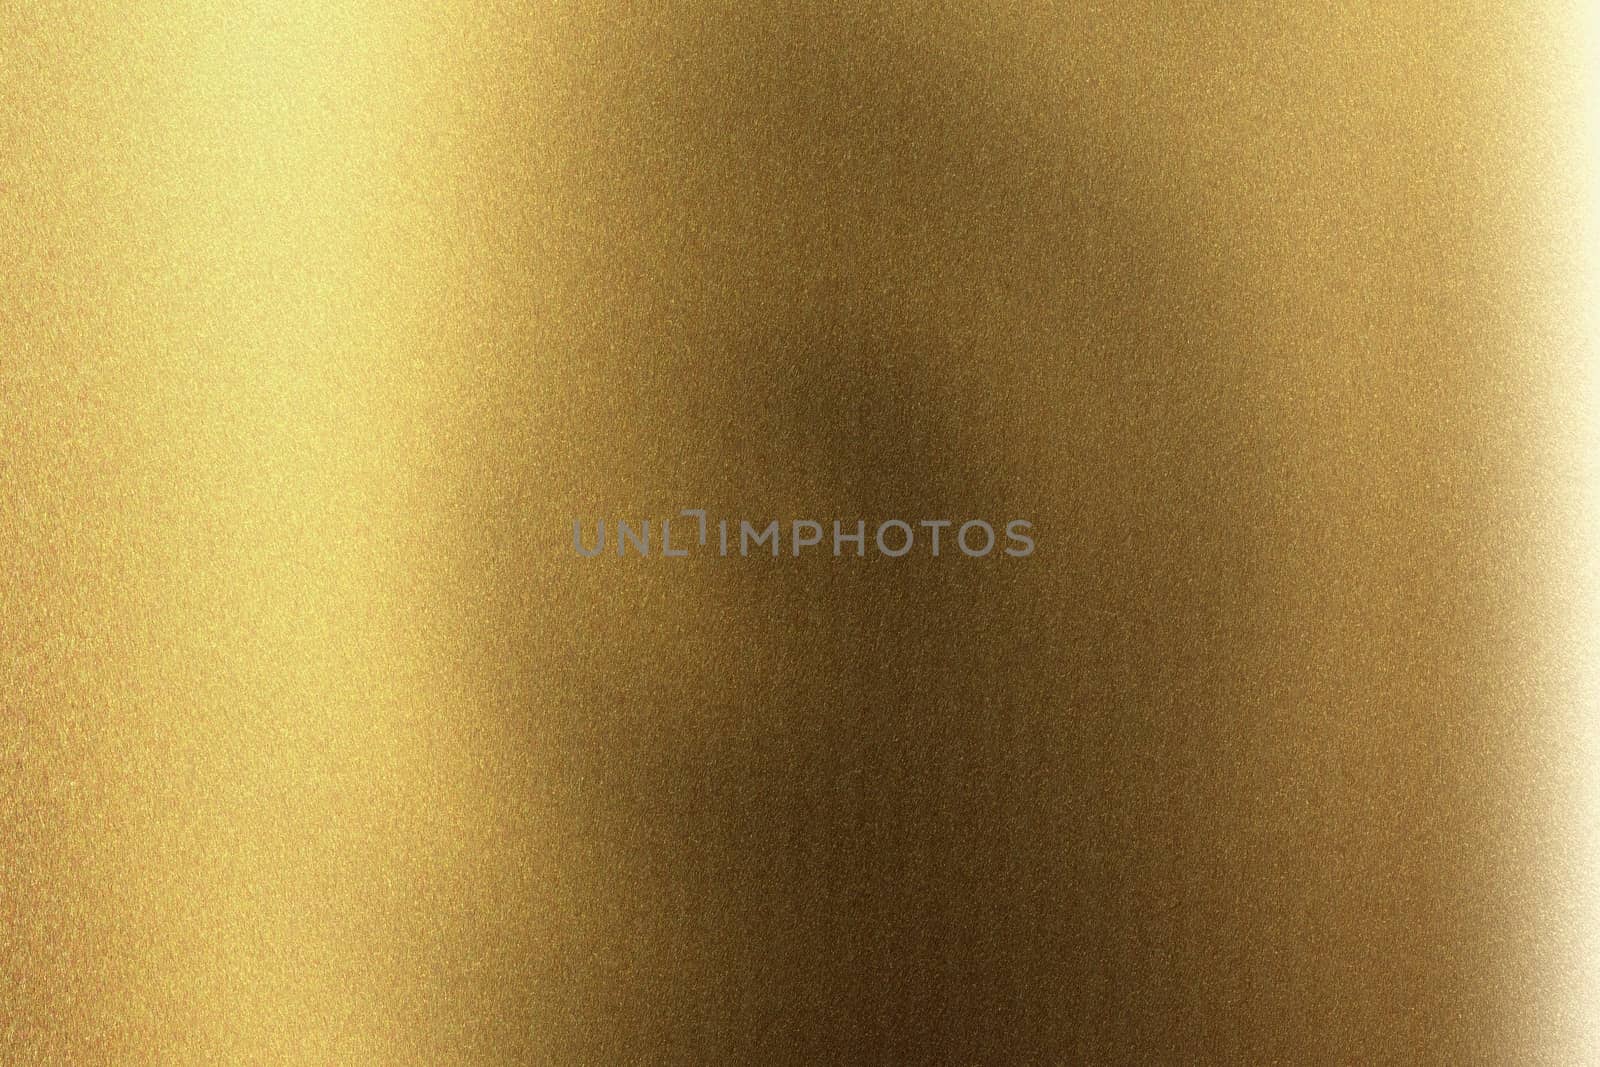 Dirty golden metal wall, abstract texture background